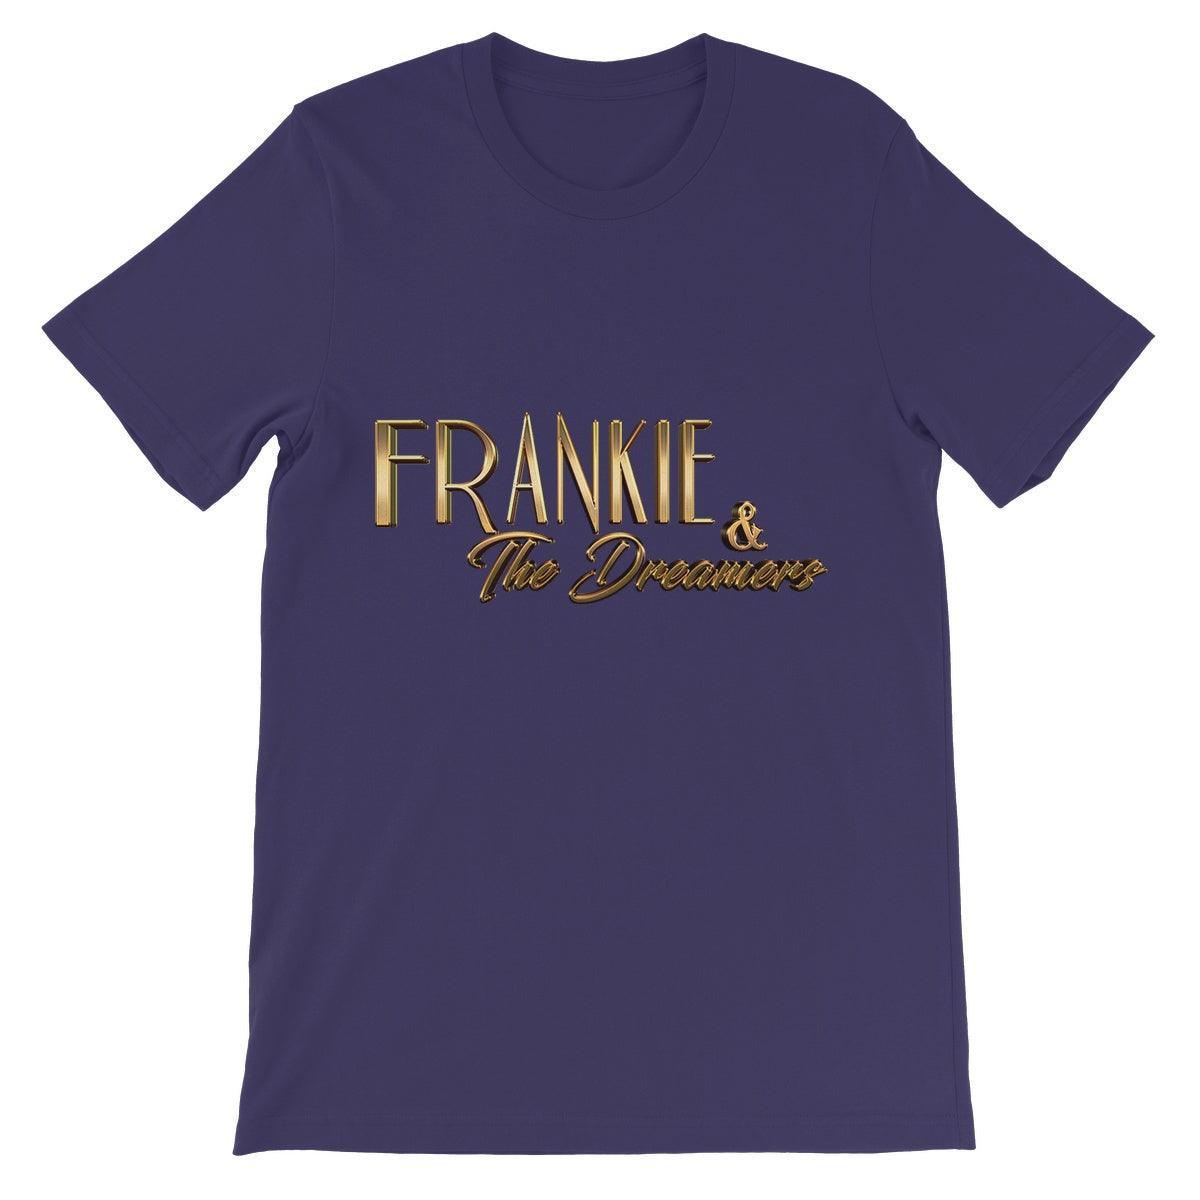 Frankie And The Dreamers Unisex Short Sleeve T-Shirt | Apparel Navy